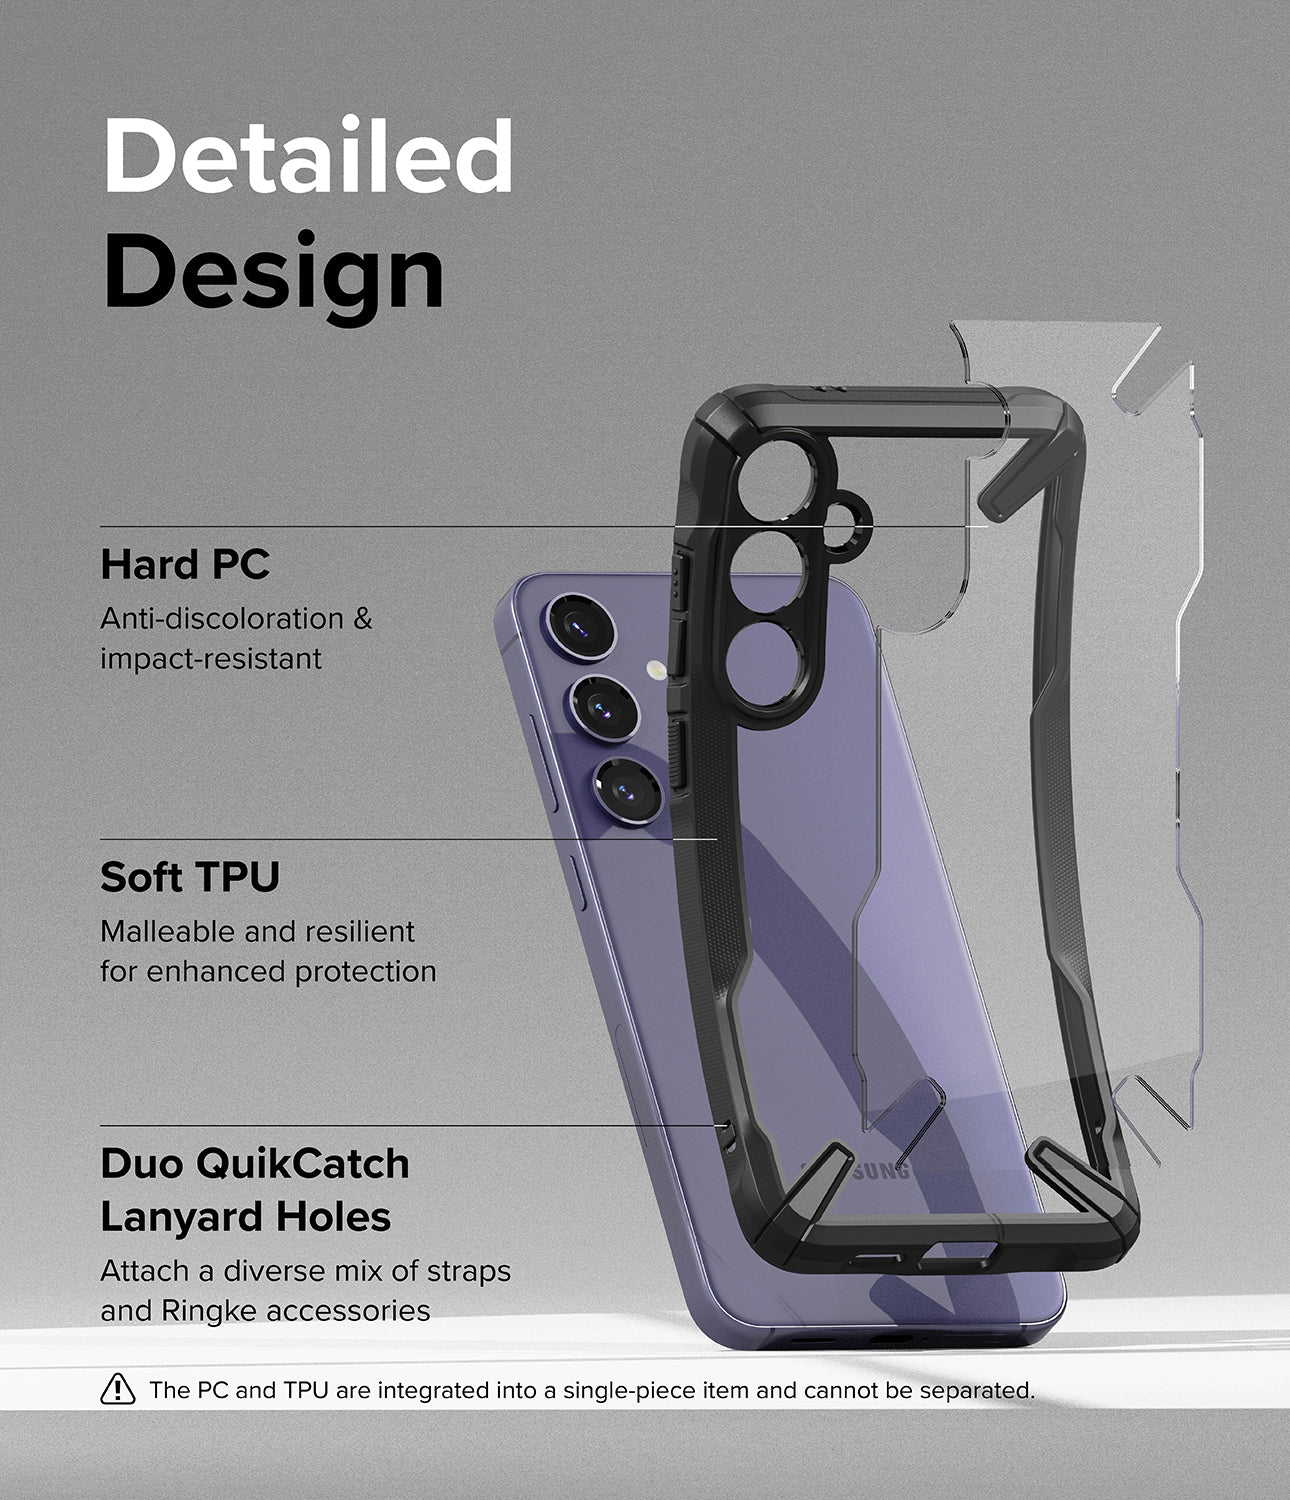 Galaxy S24 Case | Fusion-X - Black - Detailed Design. Anti-discoloration and impact-resistant with Hard PC. Malleable and resilient for enhanced protection with Soft TPU. Attach a diverse mix of straps and Ringke accessories.